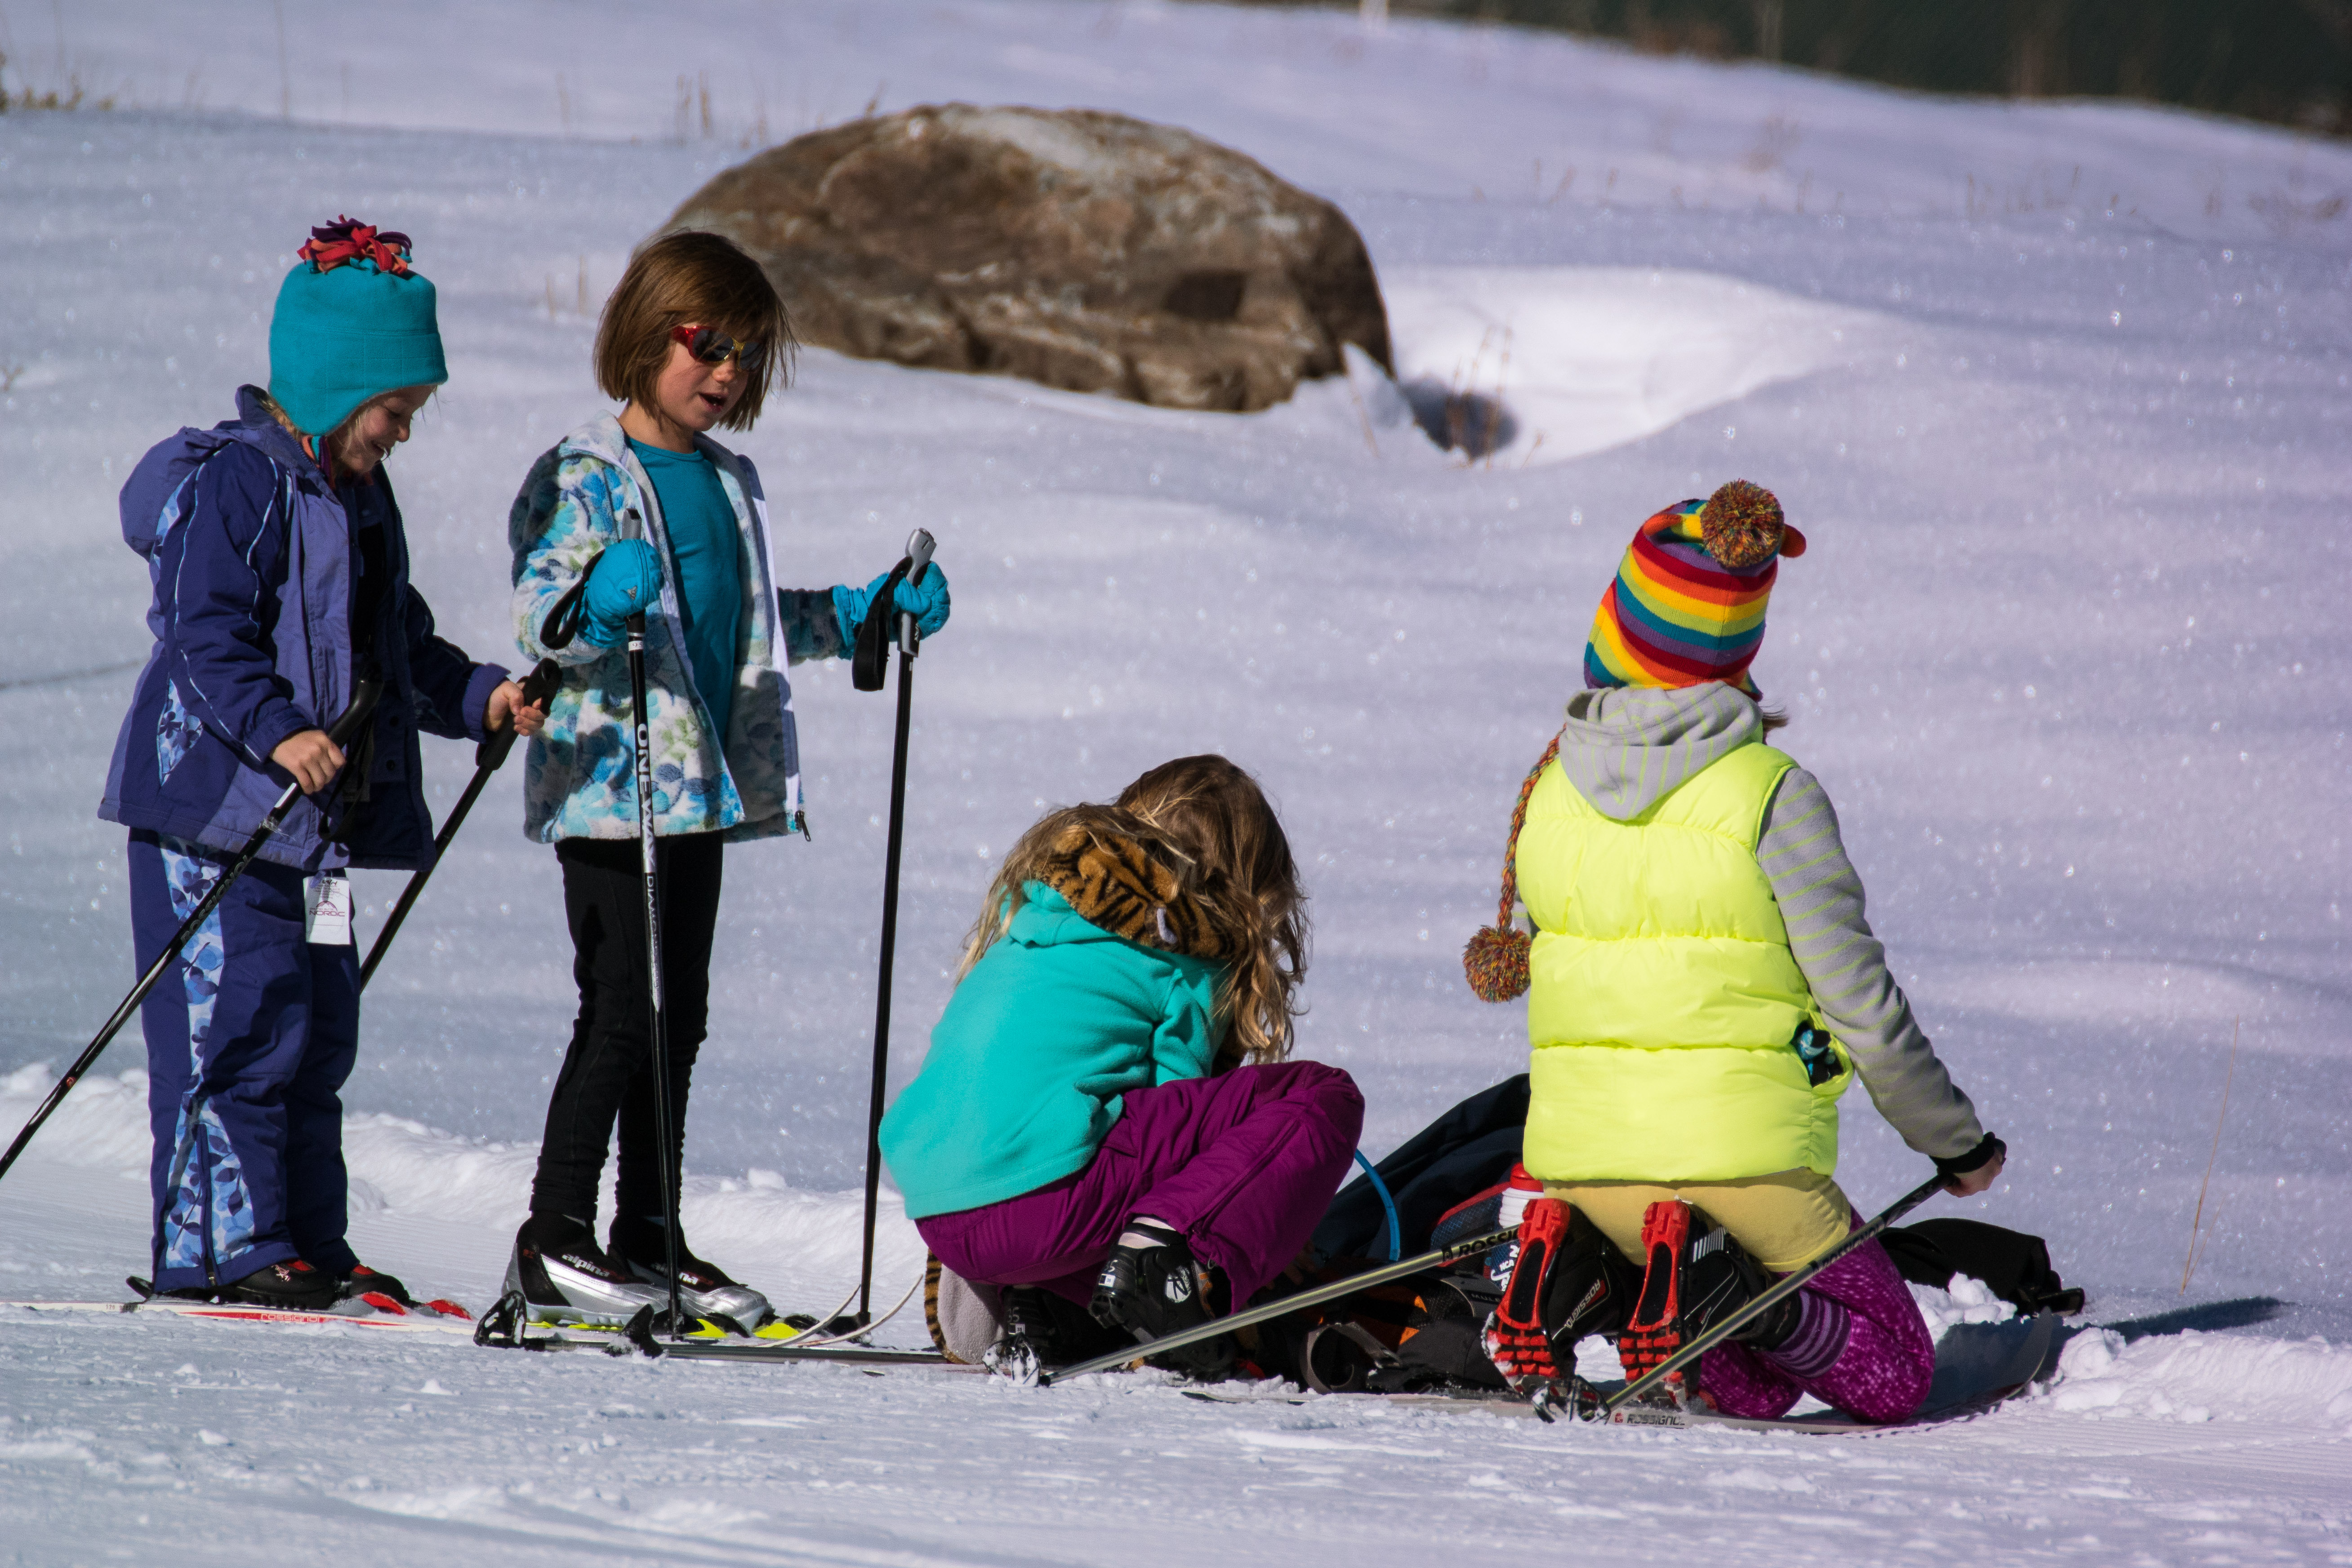 Here's a deal: Kids 17 and under enjoy free rentals, passes, and clinics. (Photo Xavier Fane)